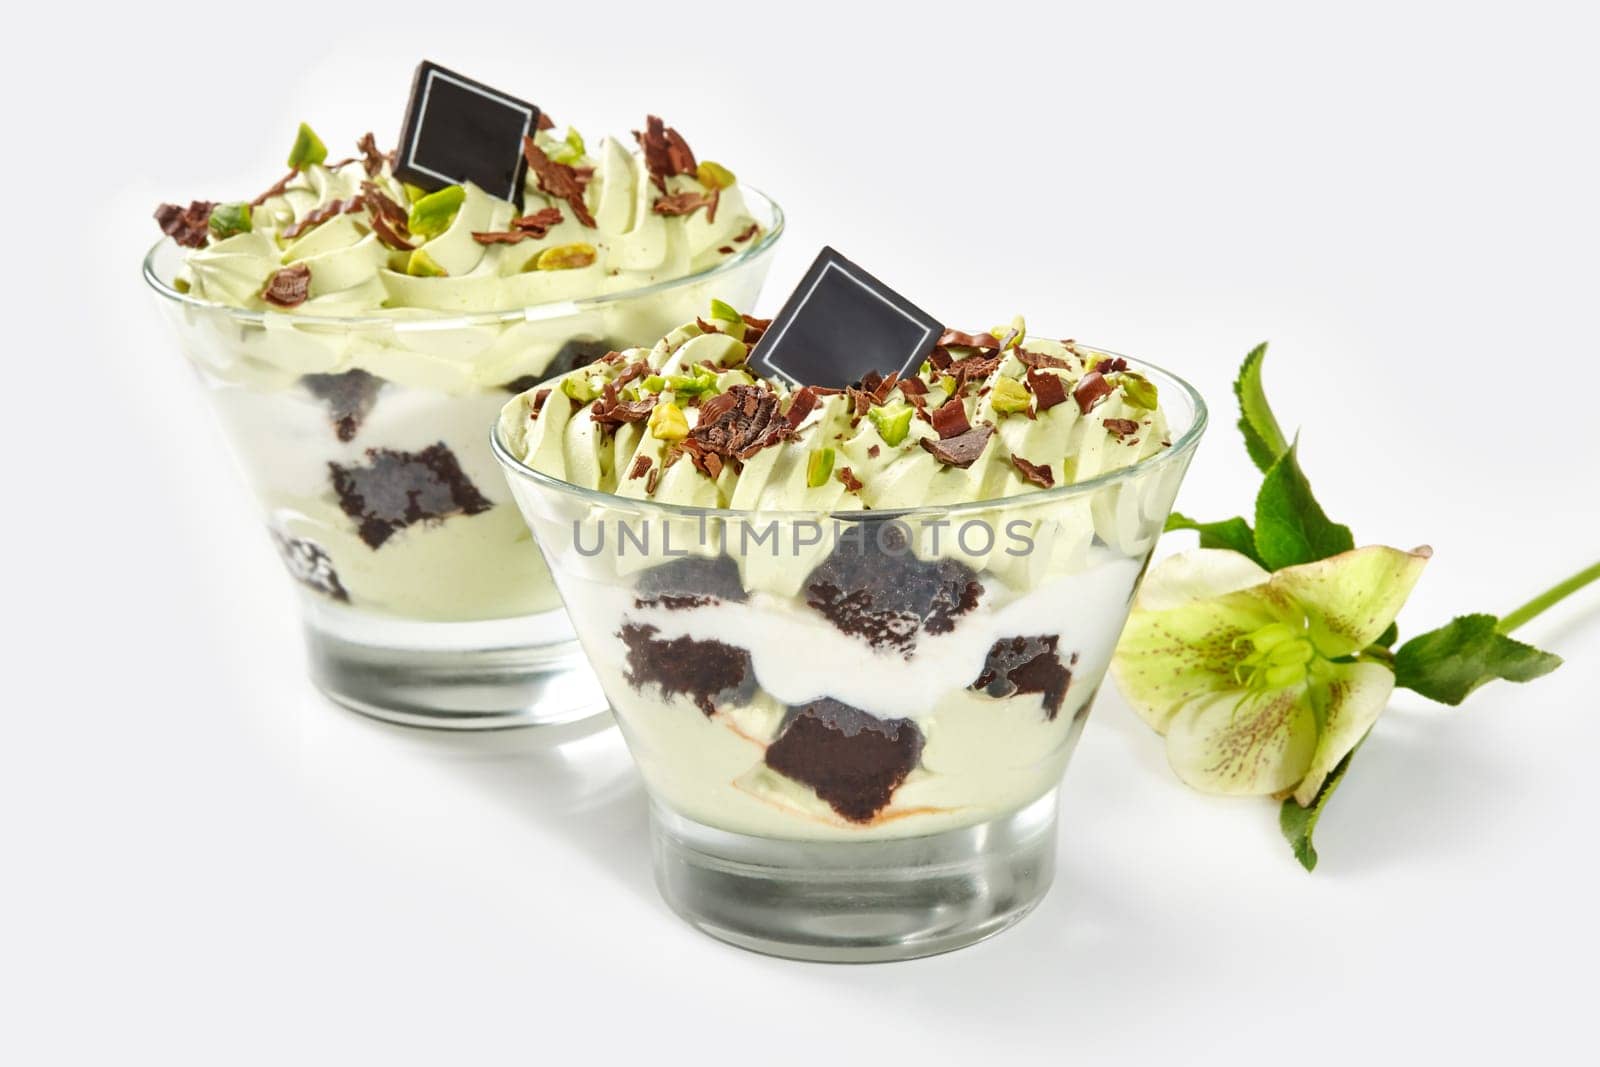 Luxurious pistachio sundae with brownie and whipped cream by nazarovsergey